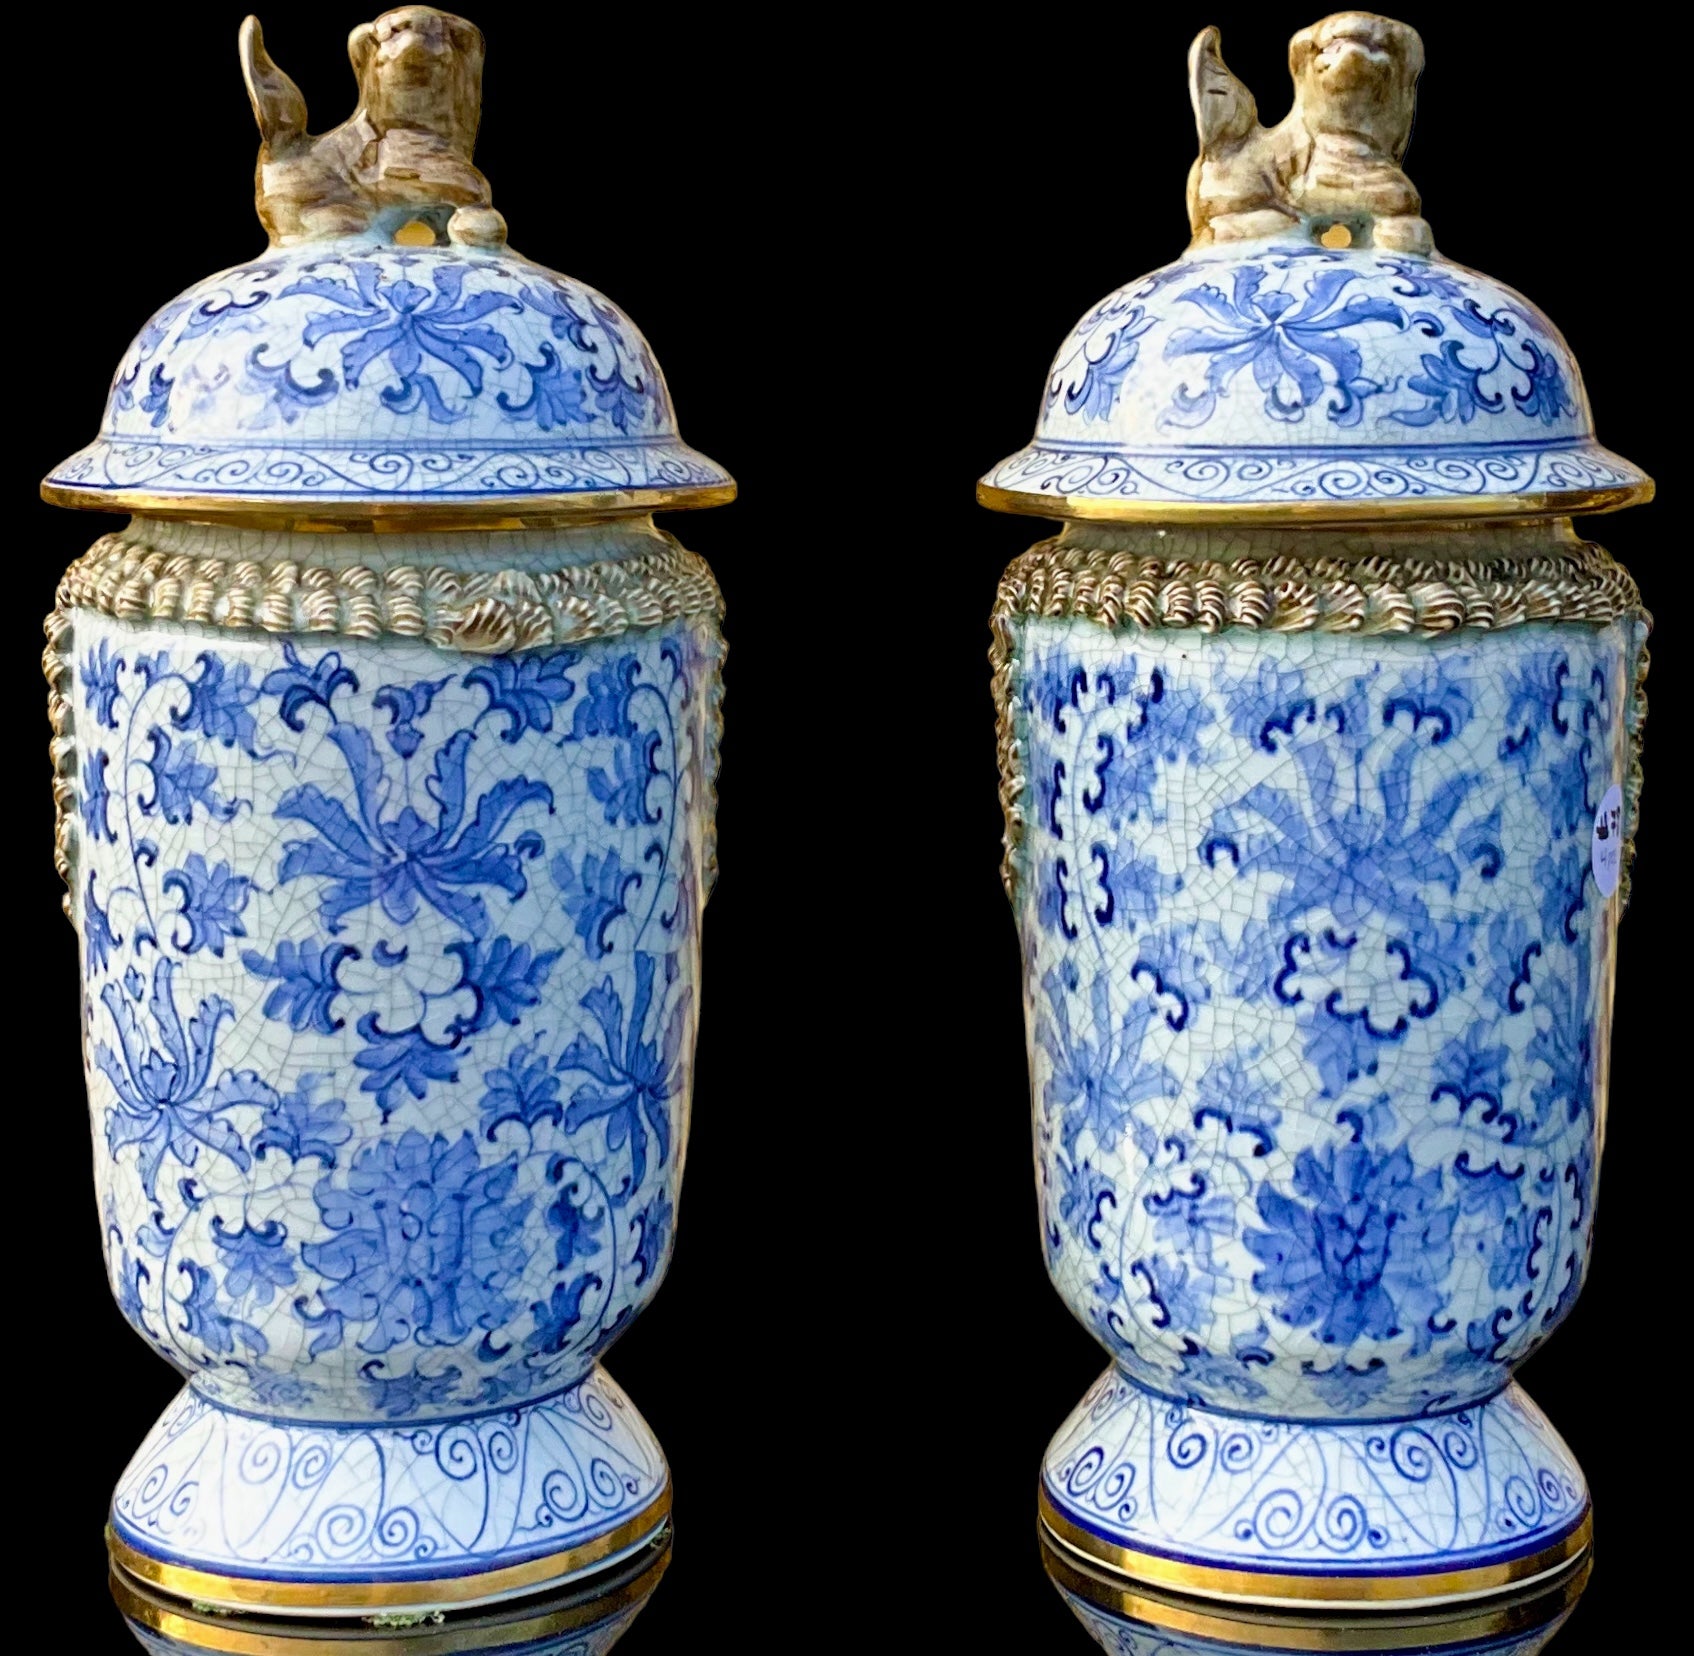 This s a lovely pair of Chinese Export style blue and white ceramic ginger jars. They have gilt accents and foo dog finials. The pottery is intentionally crackled. They are marked.